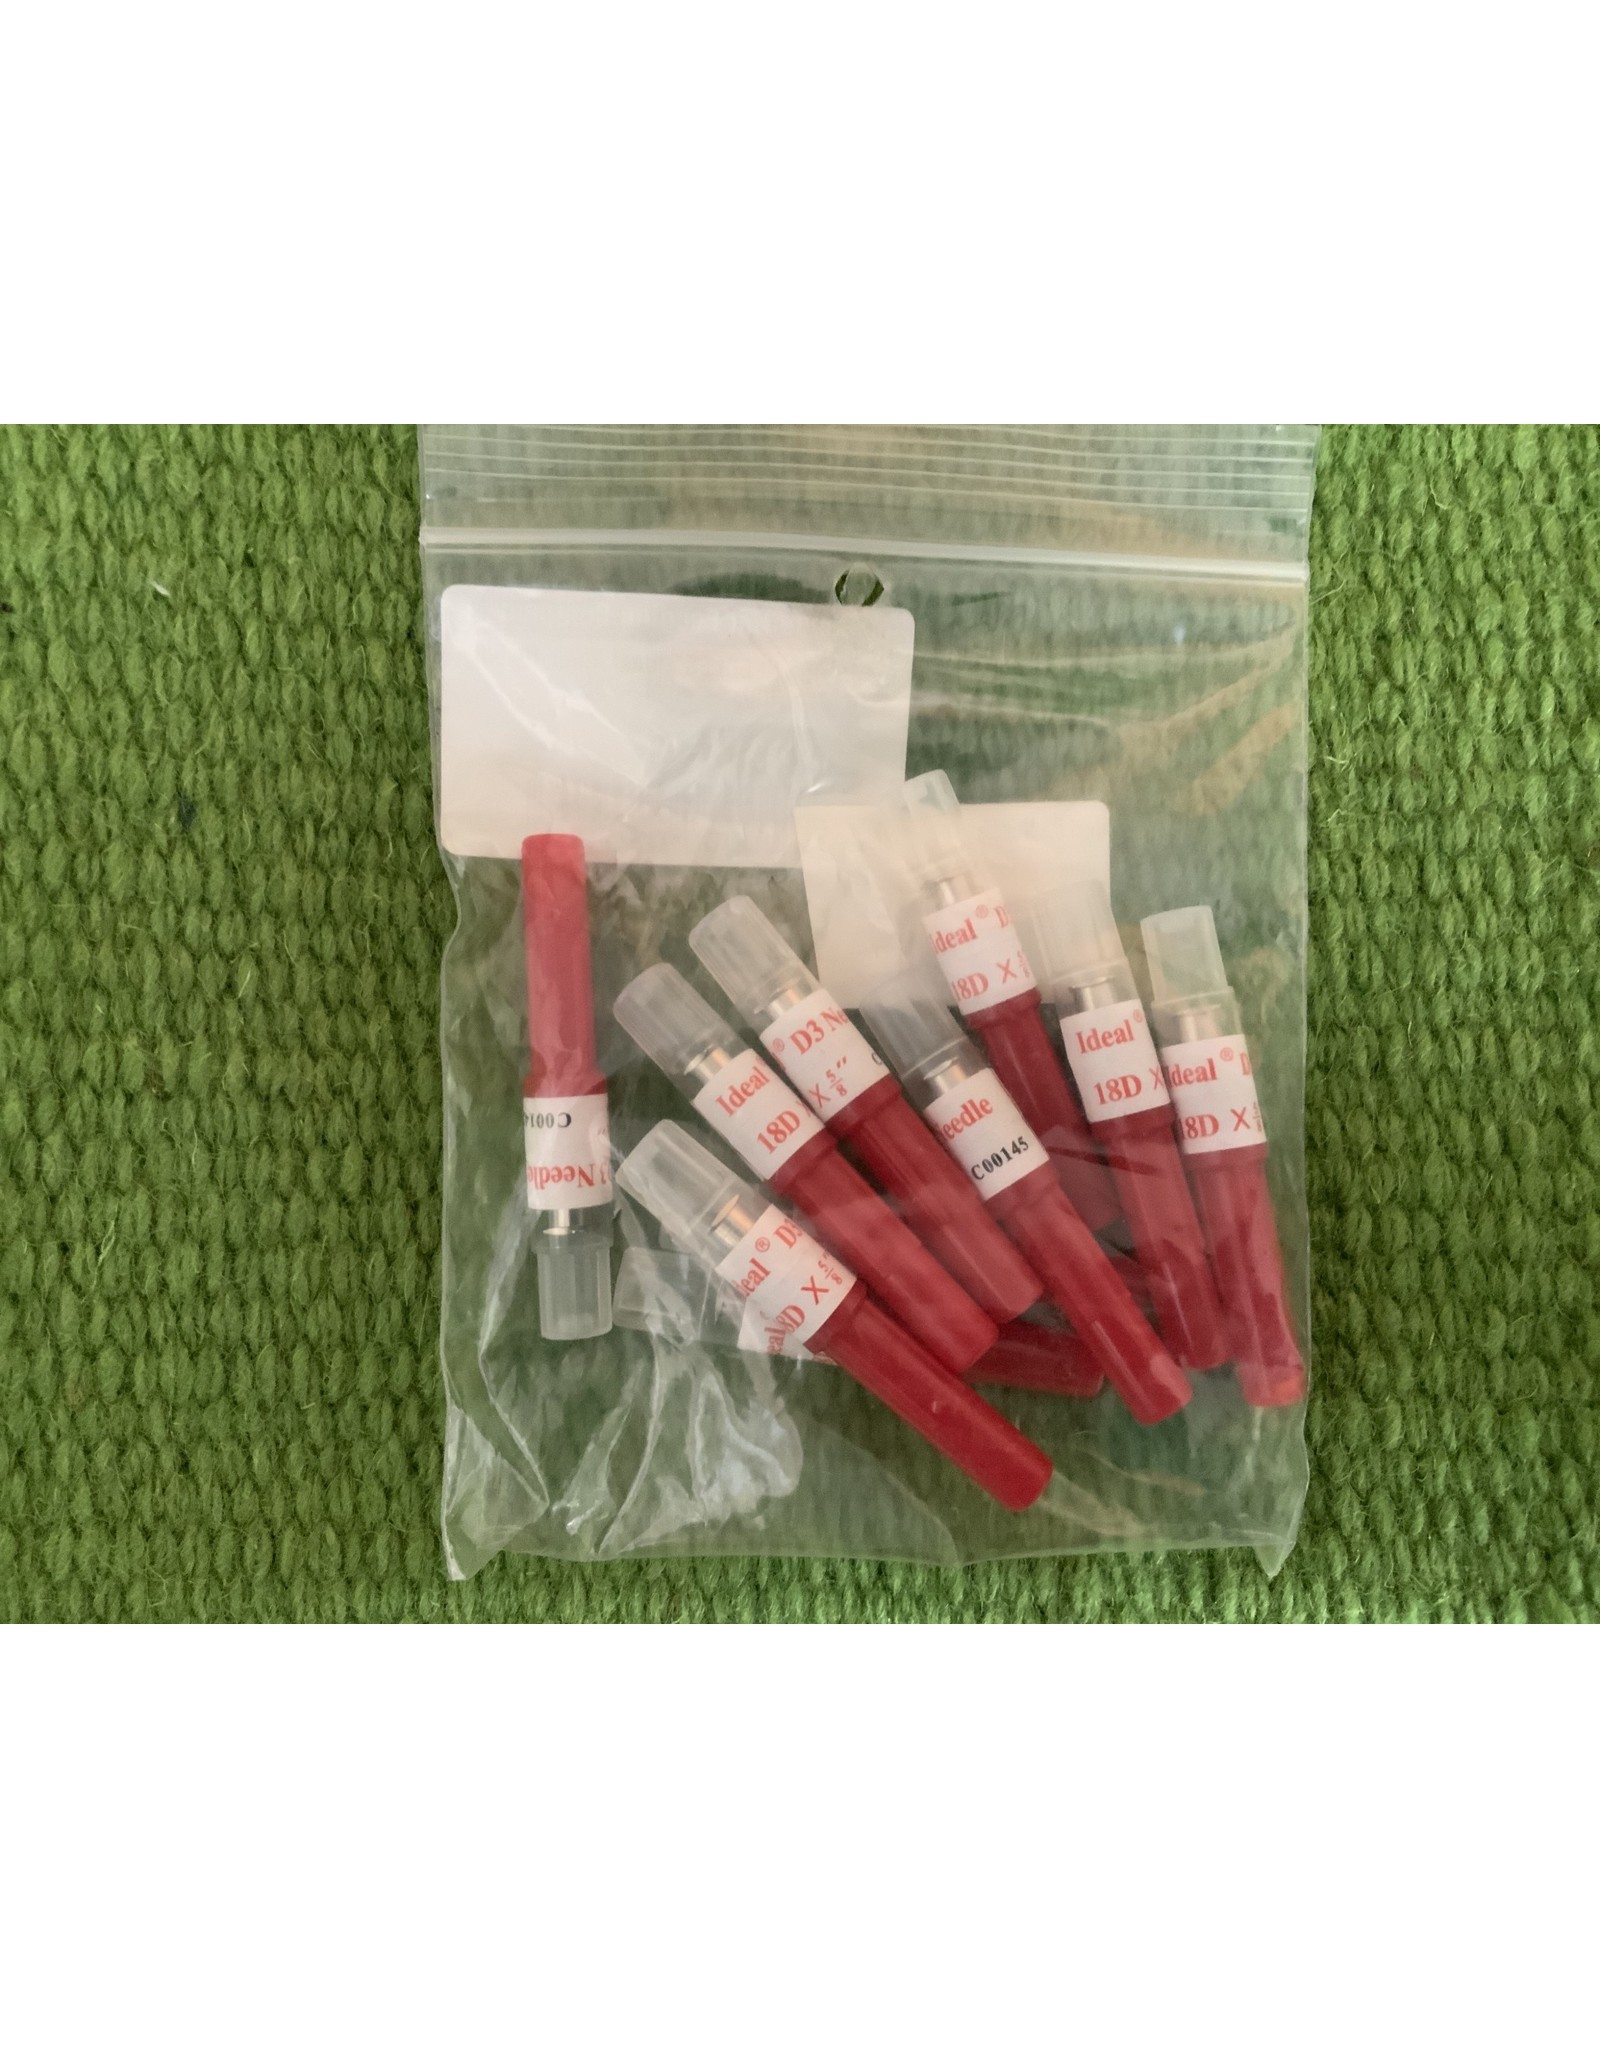 NEEDLES* Ideal D3 Alum 18x5/8 10pk - #034-235    - These are detectible  so if they break they break in the animal they can be found - they are Aluminum and stronger then regular needles - they are a safety needle